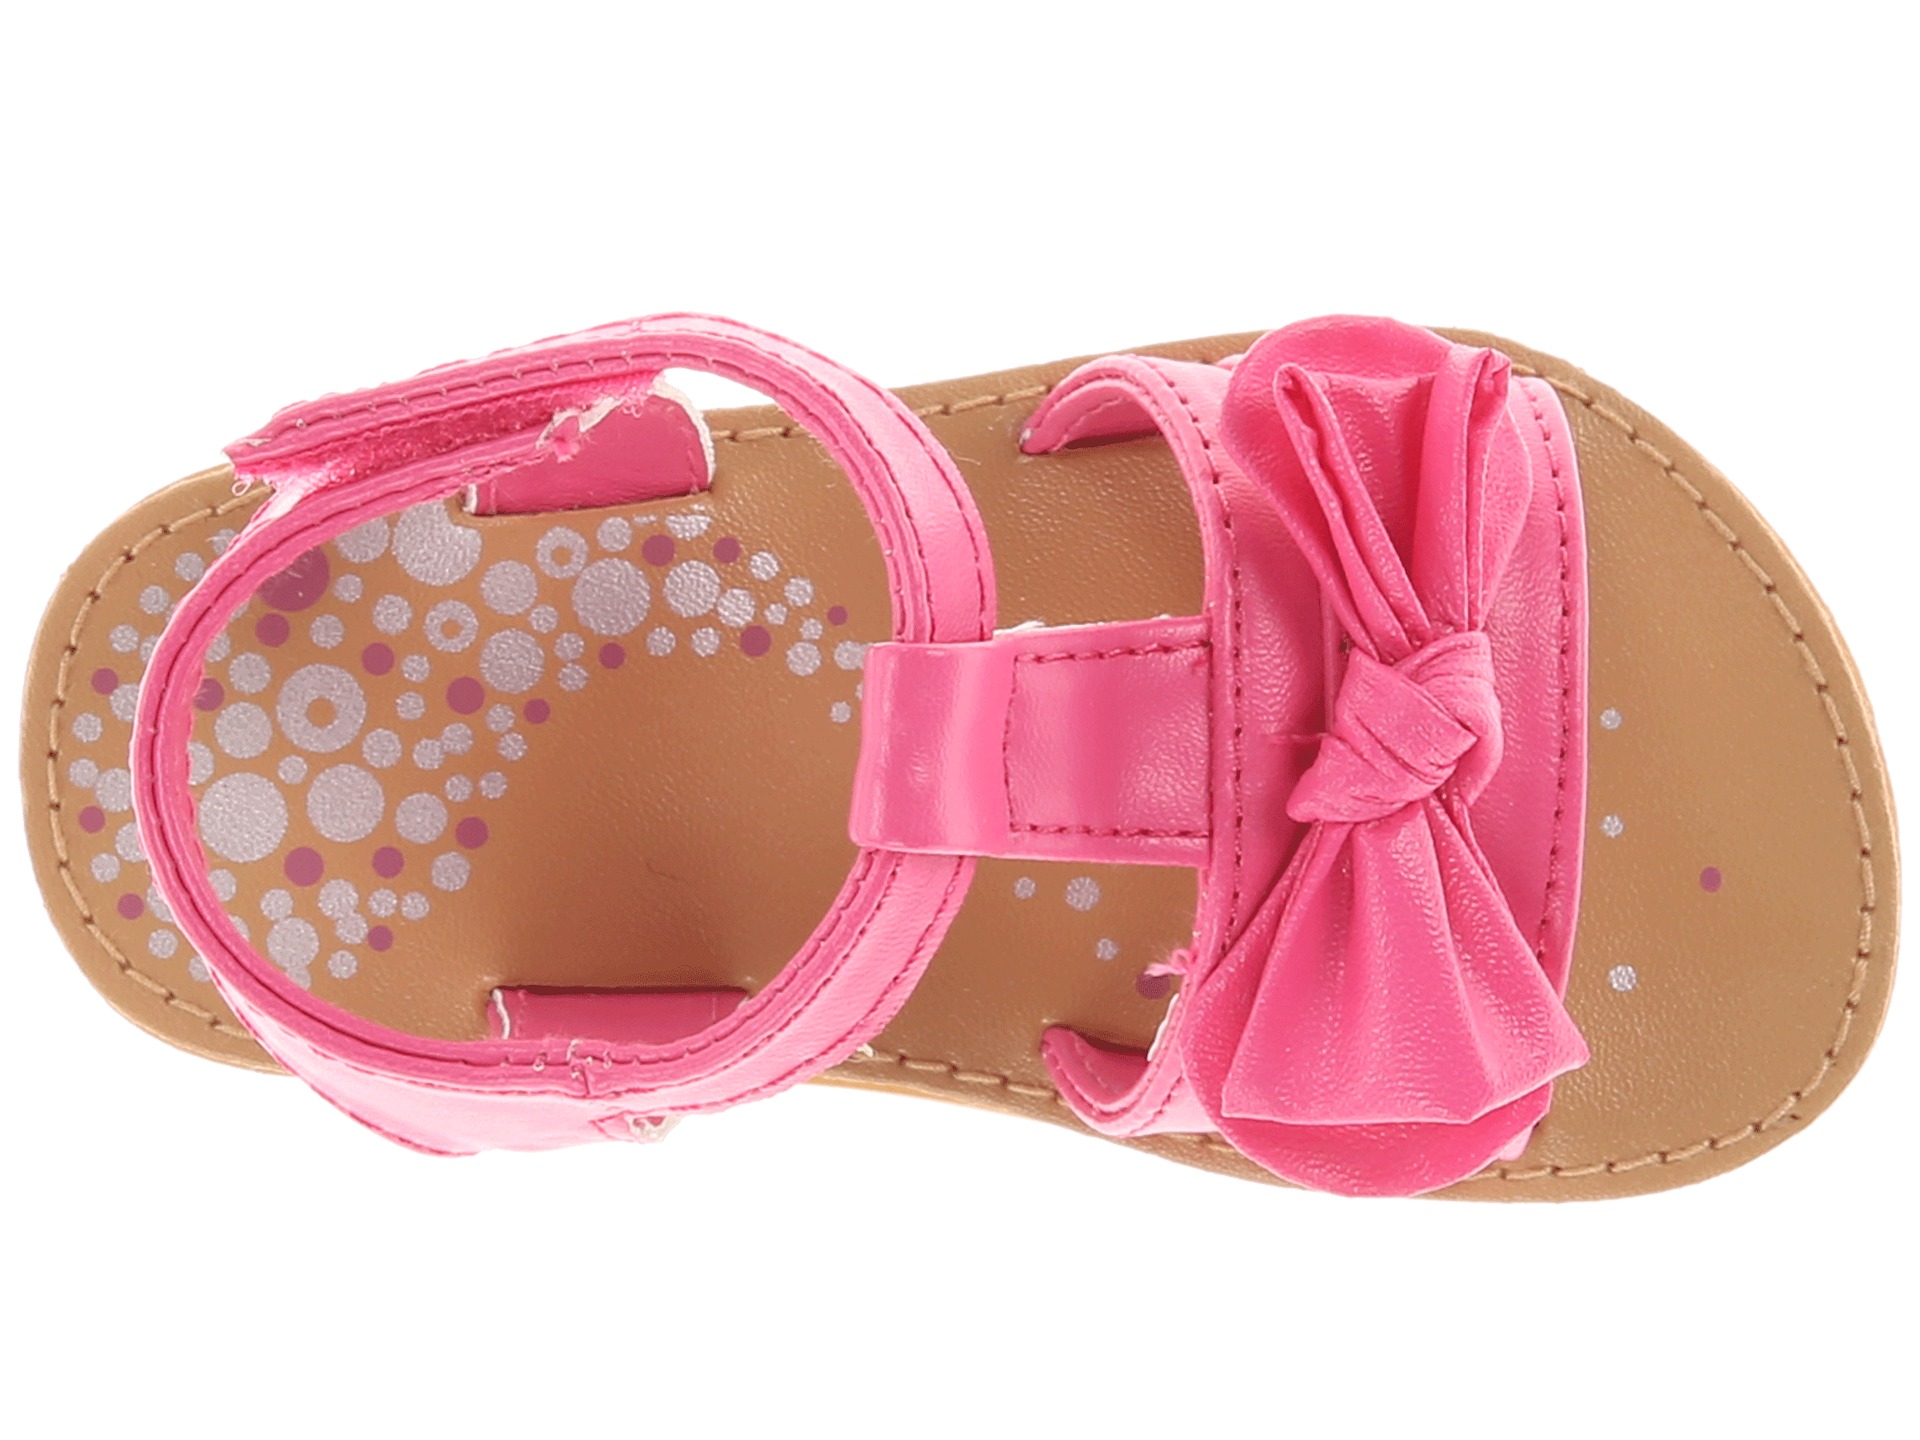 ... Deer Open Toe Sandal Infant Toddler Fuchsia | Shipped Free at Zappos